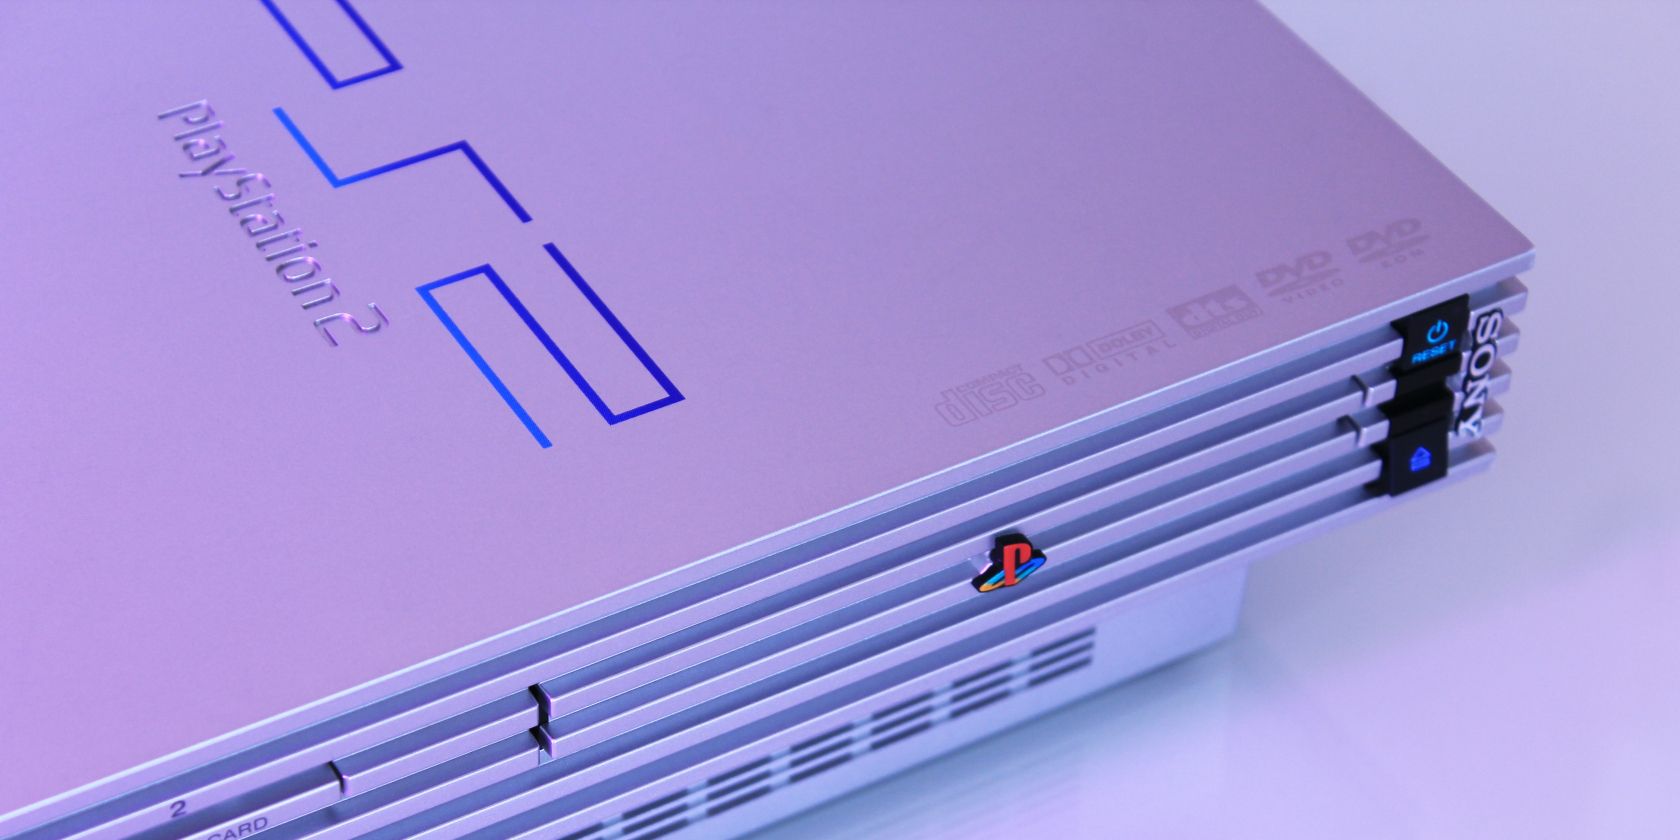 Gray Playstation 2 on a white surface